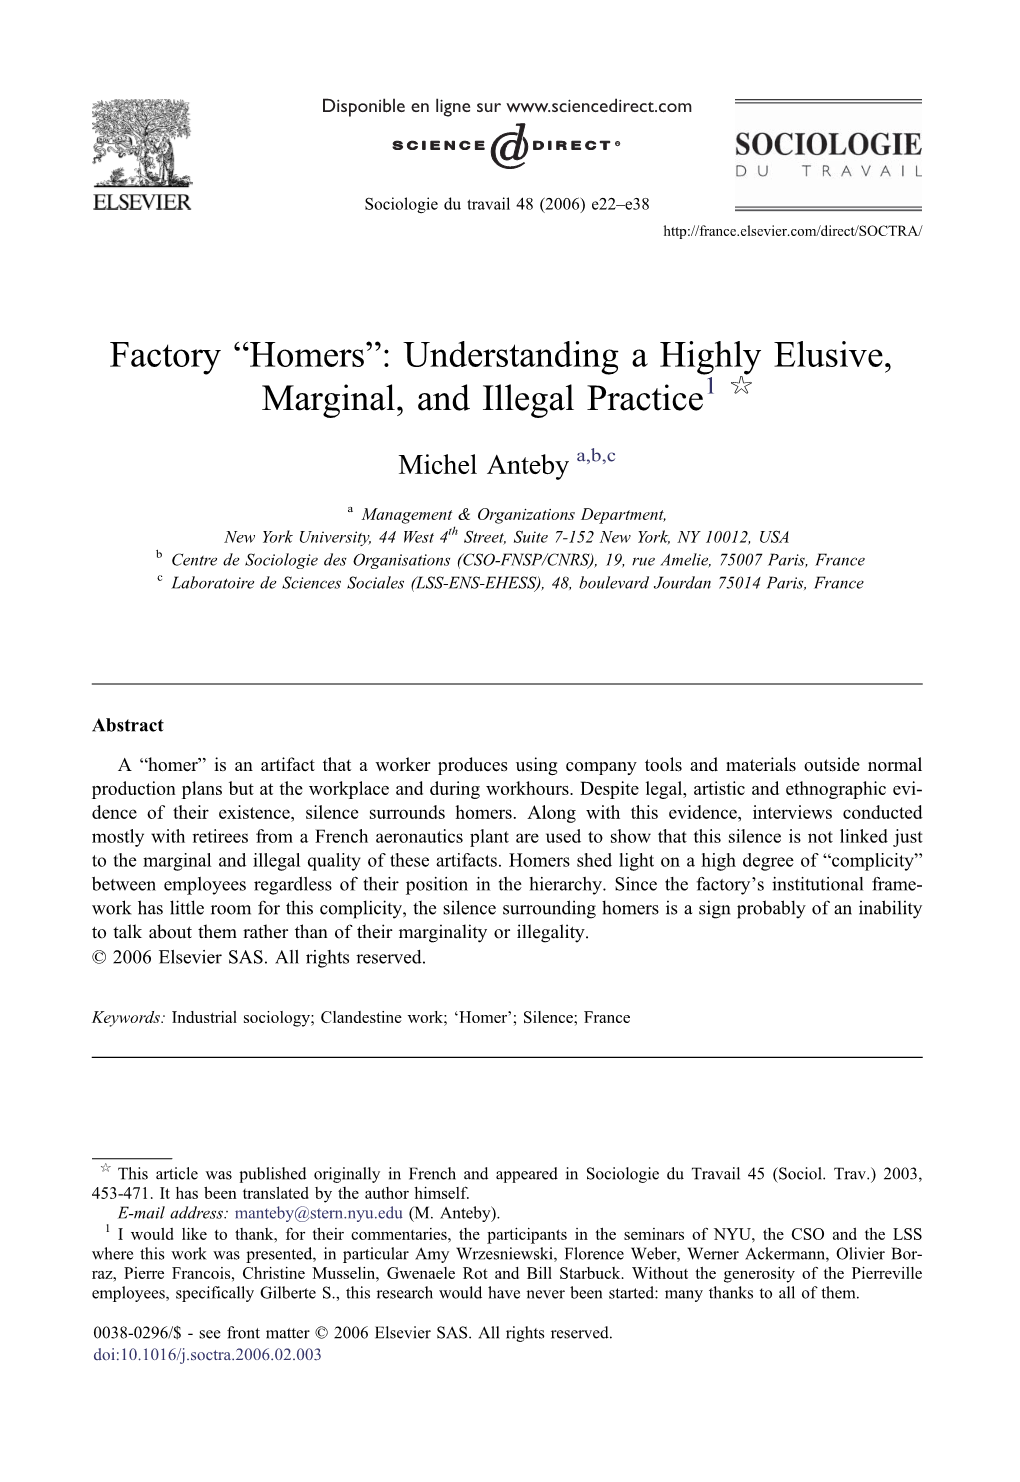 Factory “Homers”: Understanding a Highly Elusive, Marginal, and Illegal Practice1 ☆